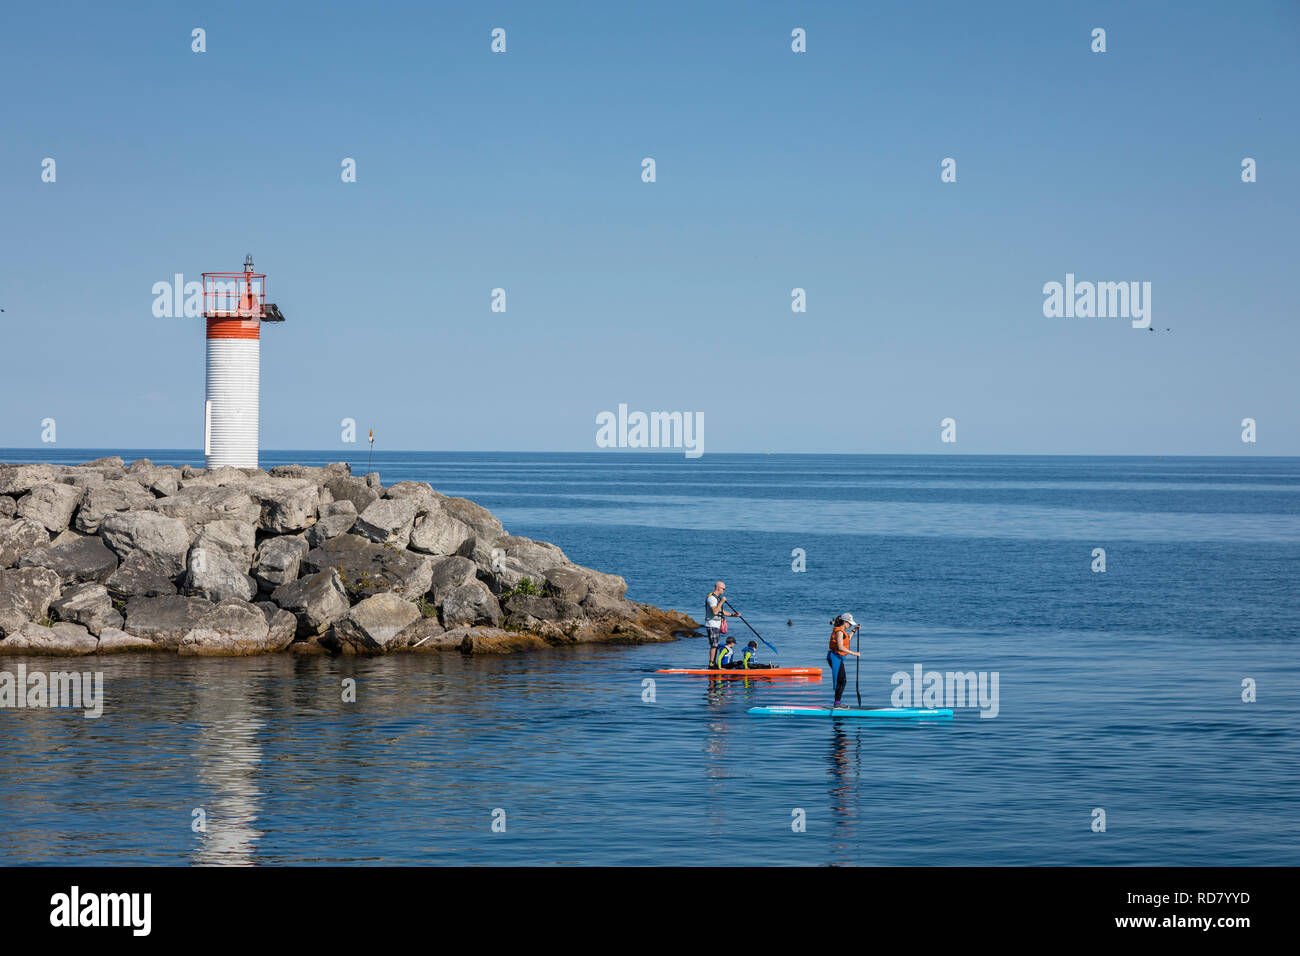 Family of four on 2 standup paddleboards, with a small lighthouse in the background. Stock Photo